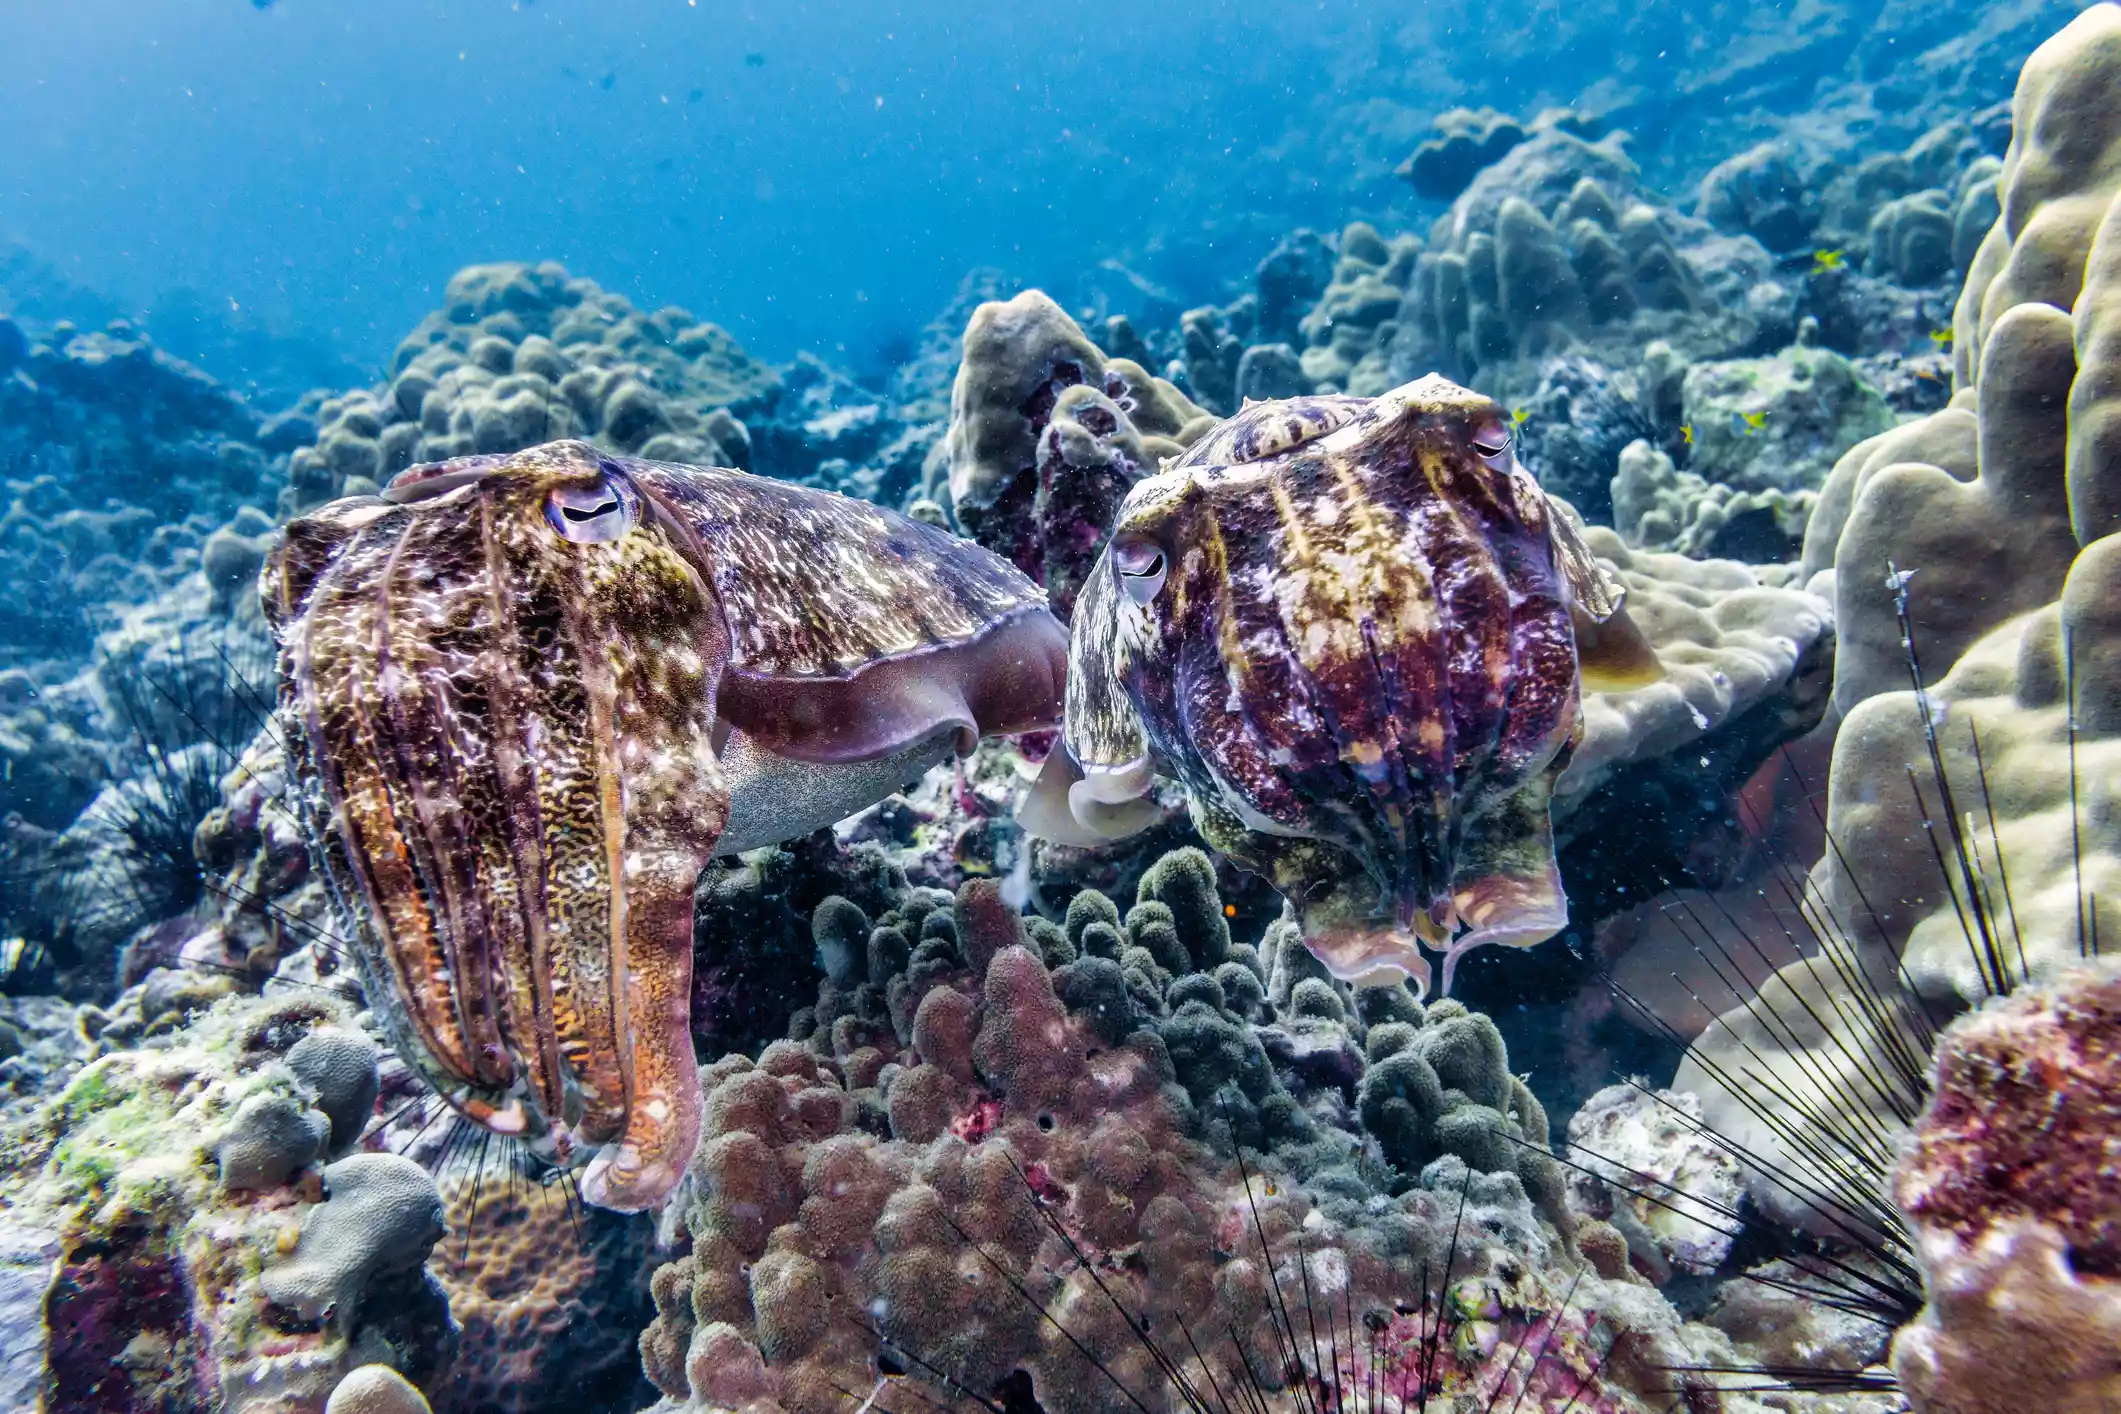 A male and female cuttlefish blending into the colorful coral background